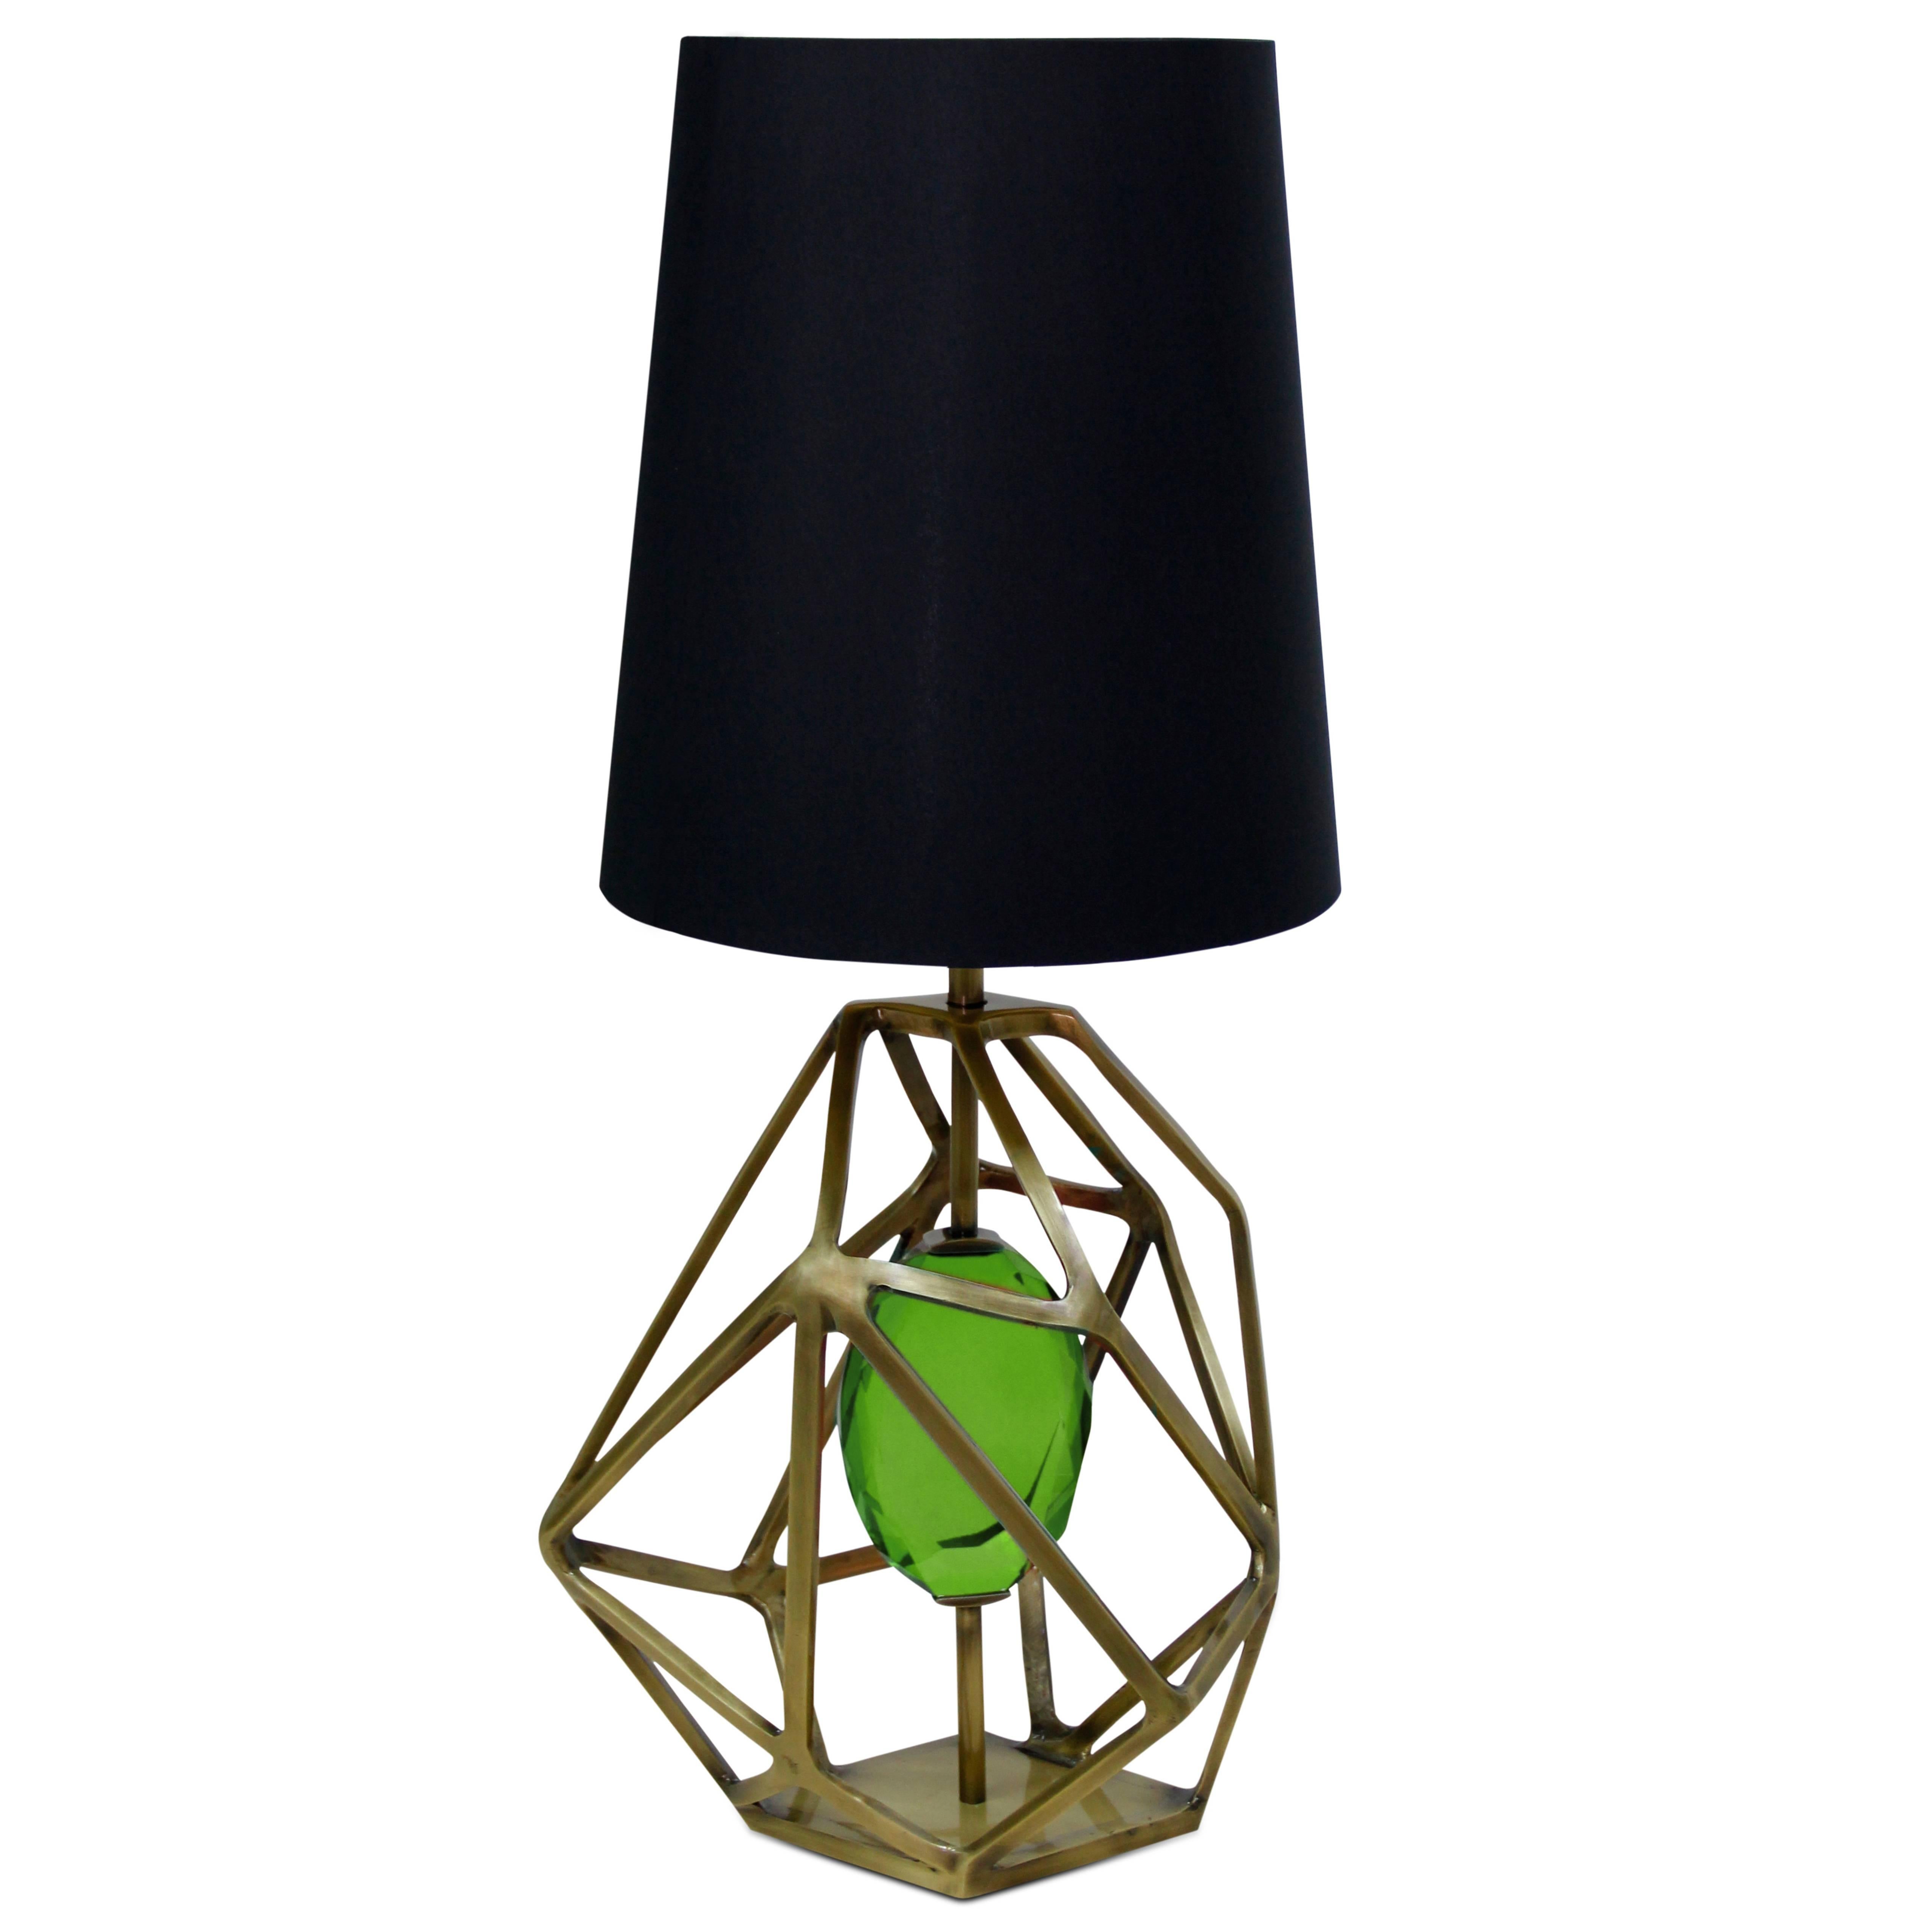 Pair of European Green Gem stone, Geometric Brass Table Lamp by Koket For Sale